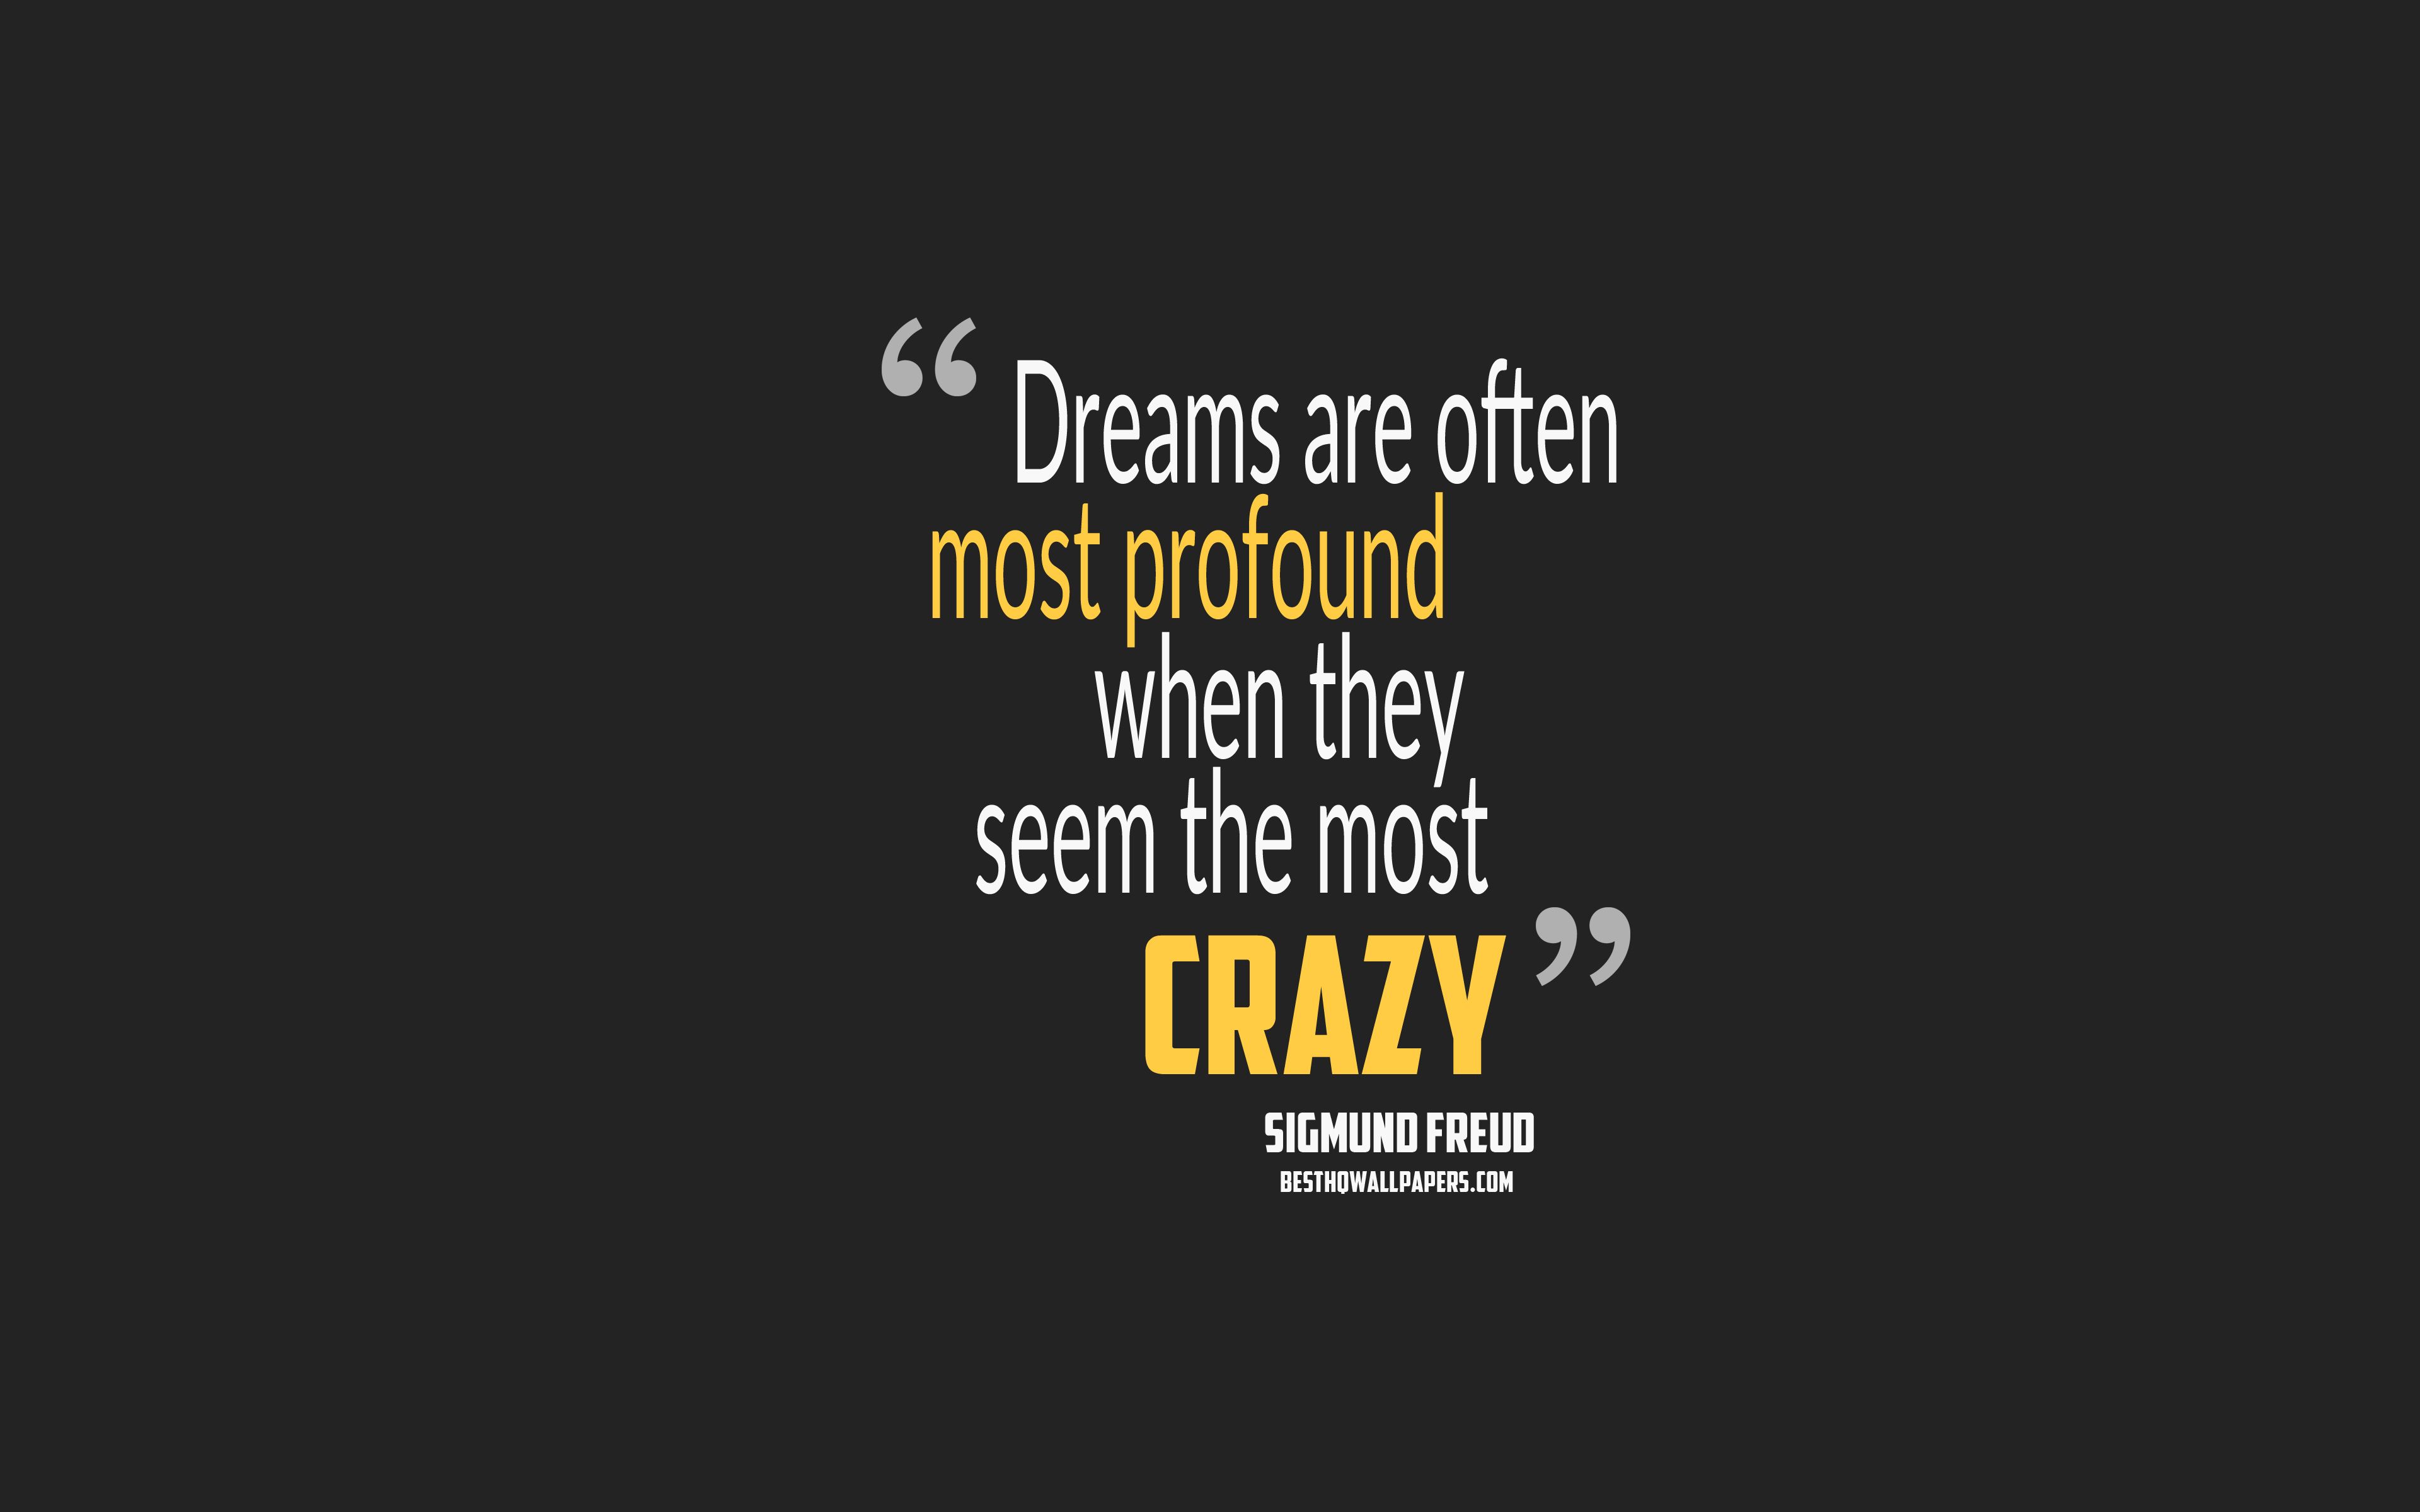 Download wallpaper Dreams are often most profound when they seem the most crazy, Sigmund Freud quotes, 4k, quotes about dreams, motivation, gray background, popular quotes for desktop with resolution 3840x2400. High Quality